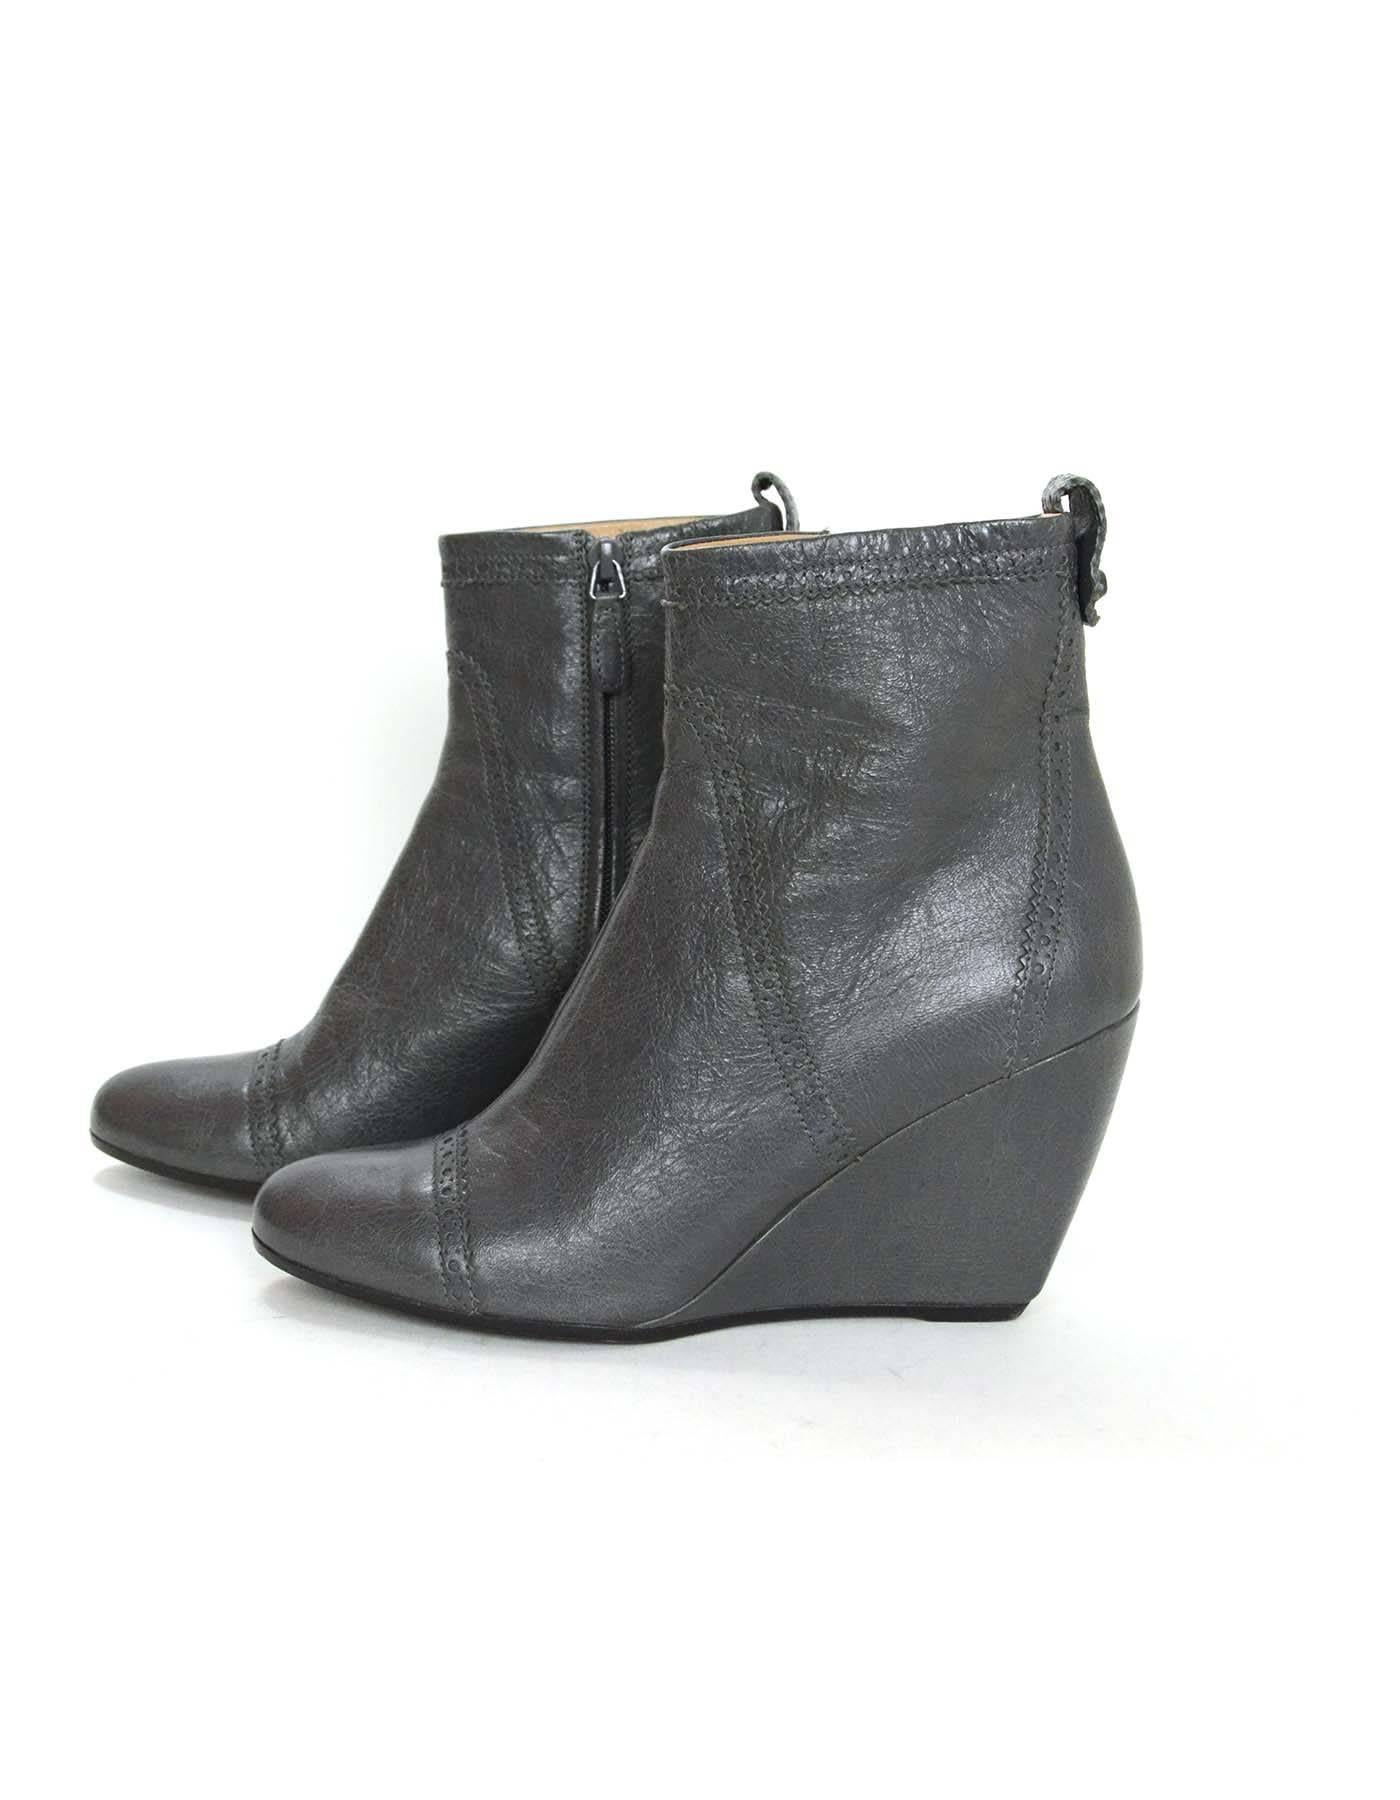 Balenciaga Grey Leather Brogue Ankle Boots 
Features spectator design at trim and back covered leather signature stud

Made In: Italy
Color: Grey
Materials: Leather
Closure: Size zip closure
Sole Stamp: Balenciaga 41 Made in Italy
Overall